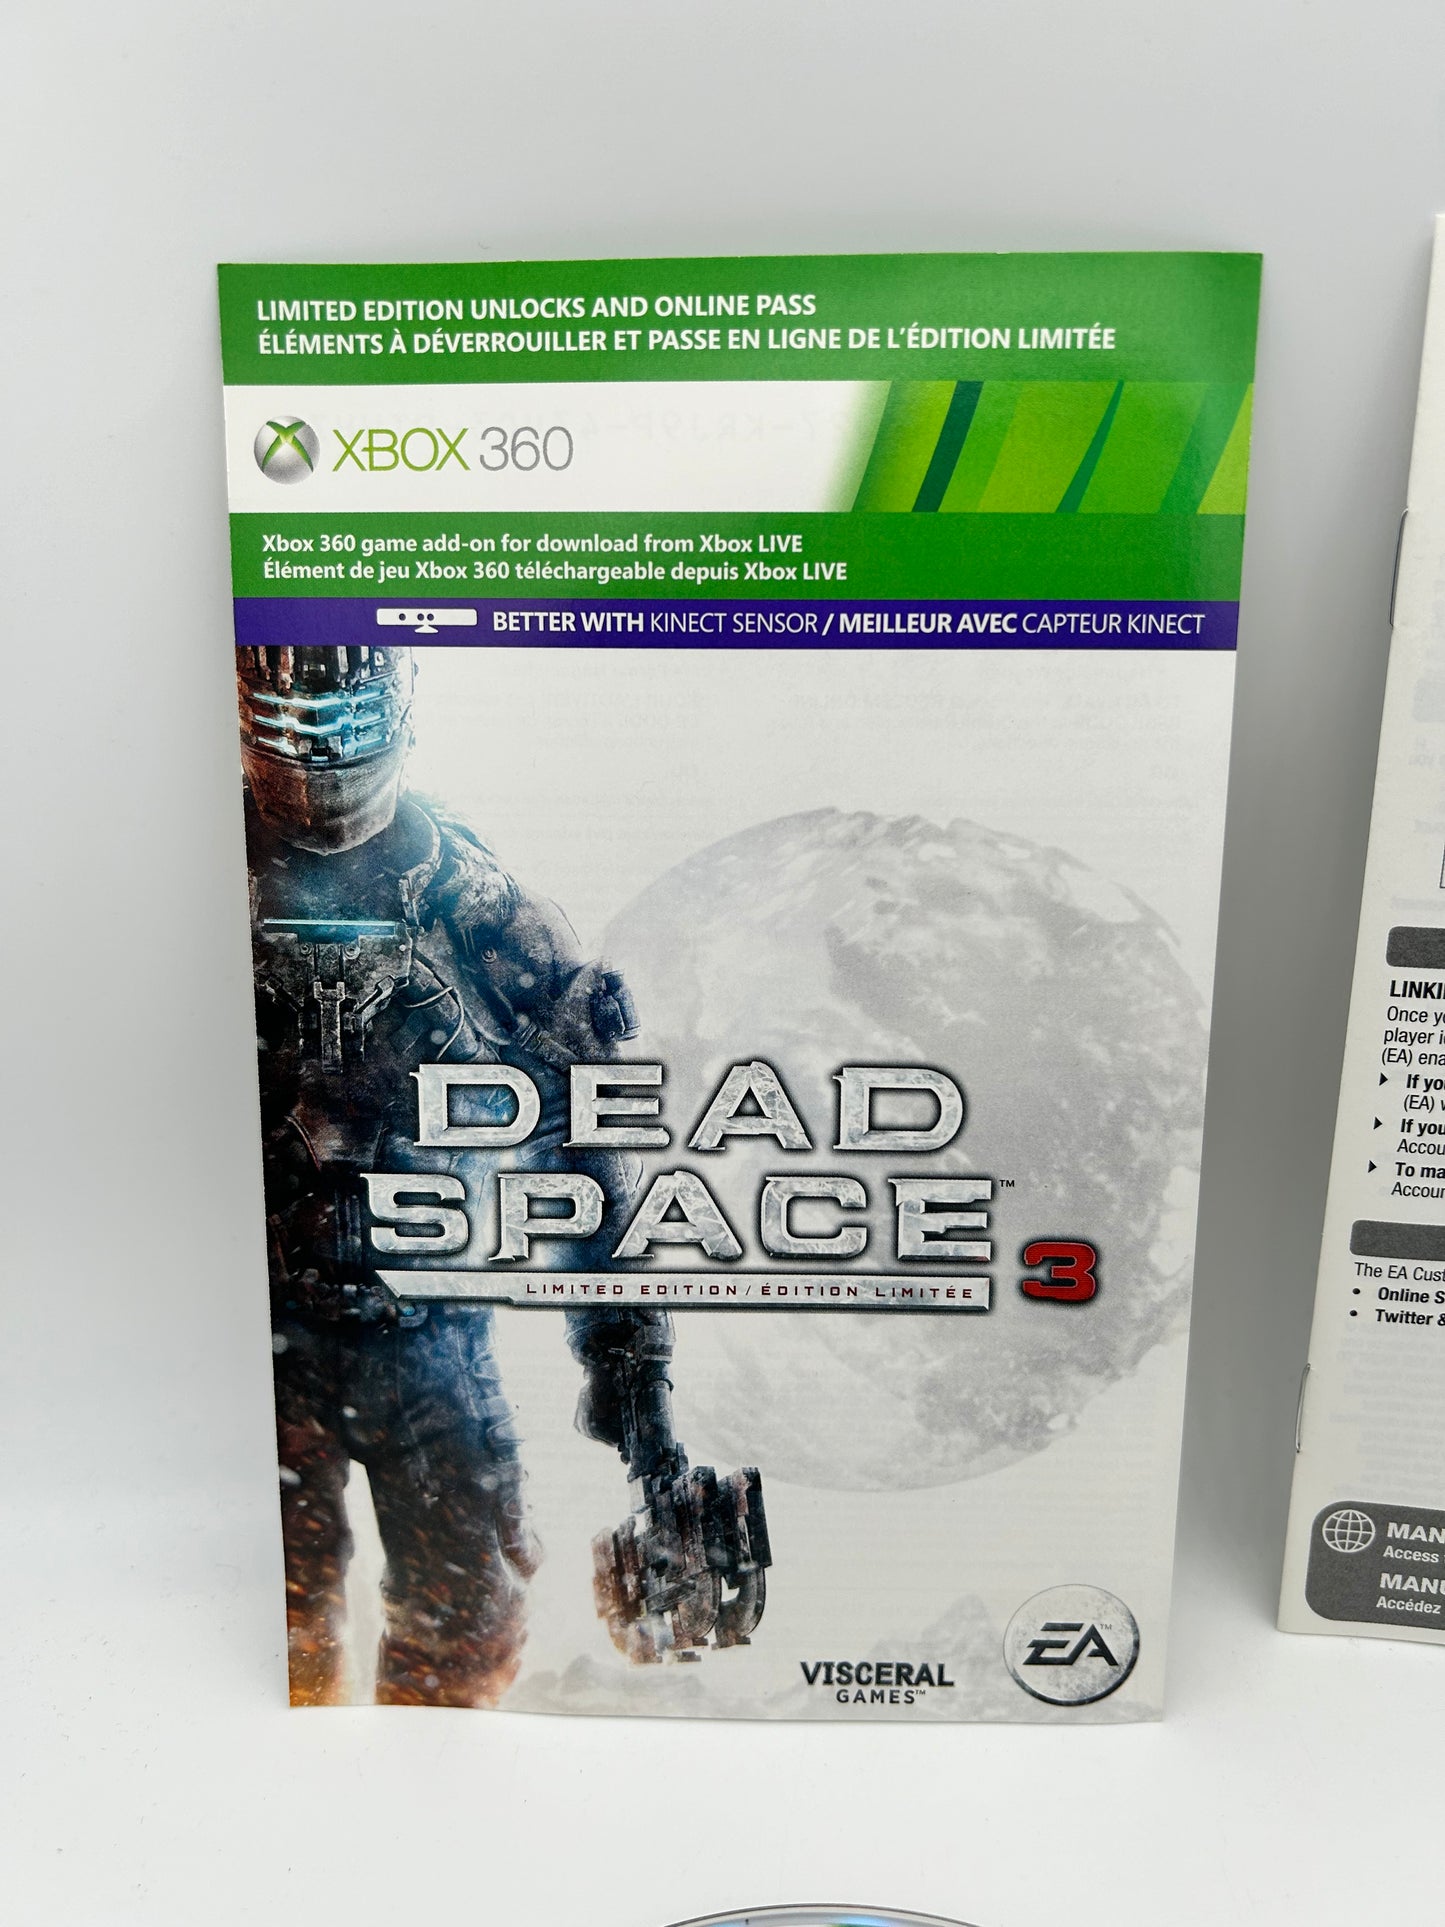 MiCROSOFT XBOX 360 | DEAD SPACE 3 | LiMiTED EDiTiON